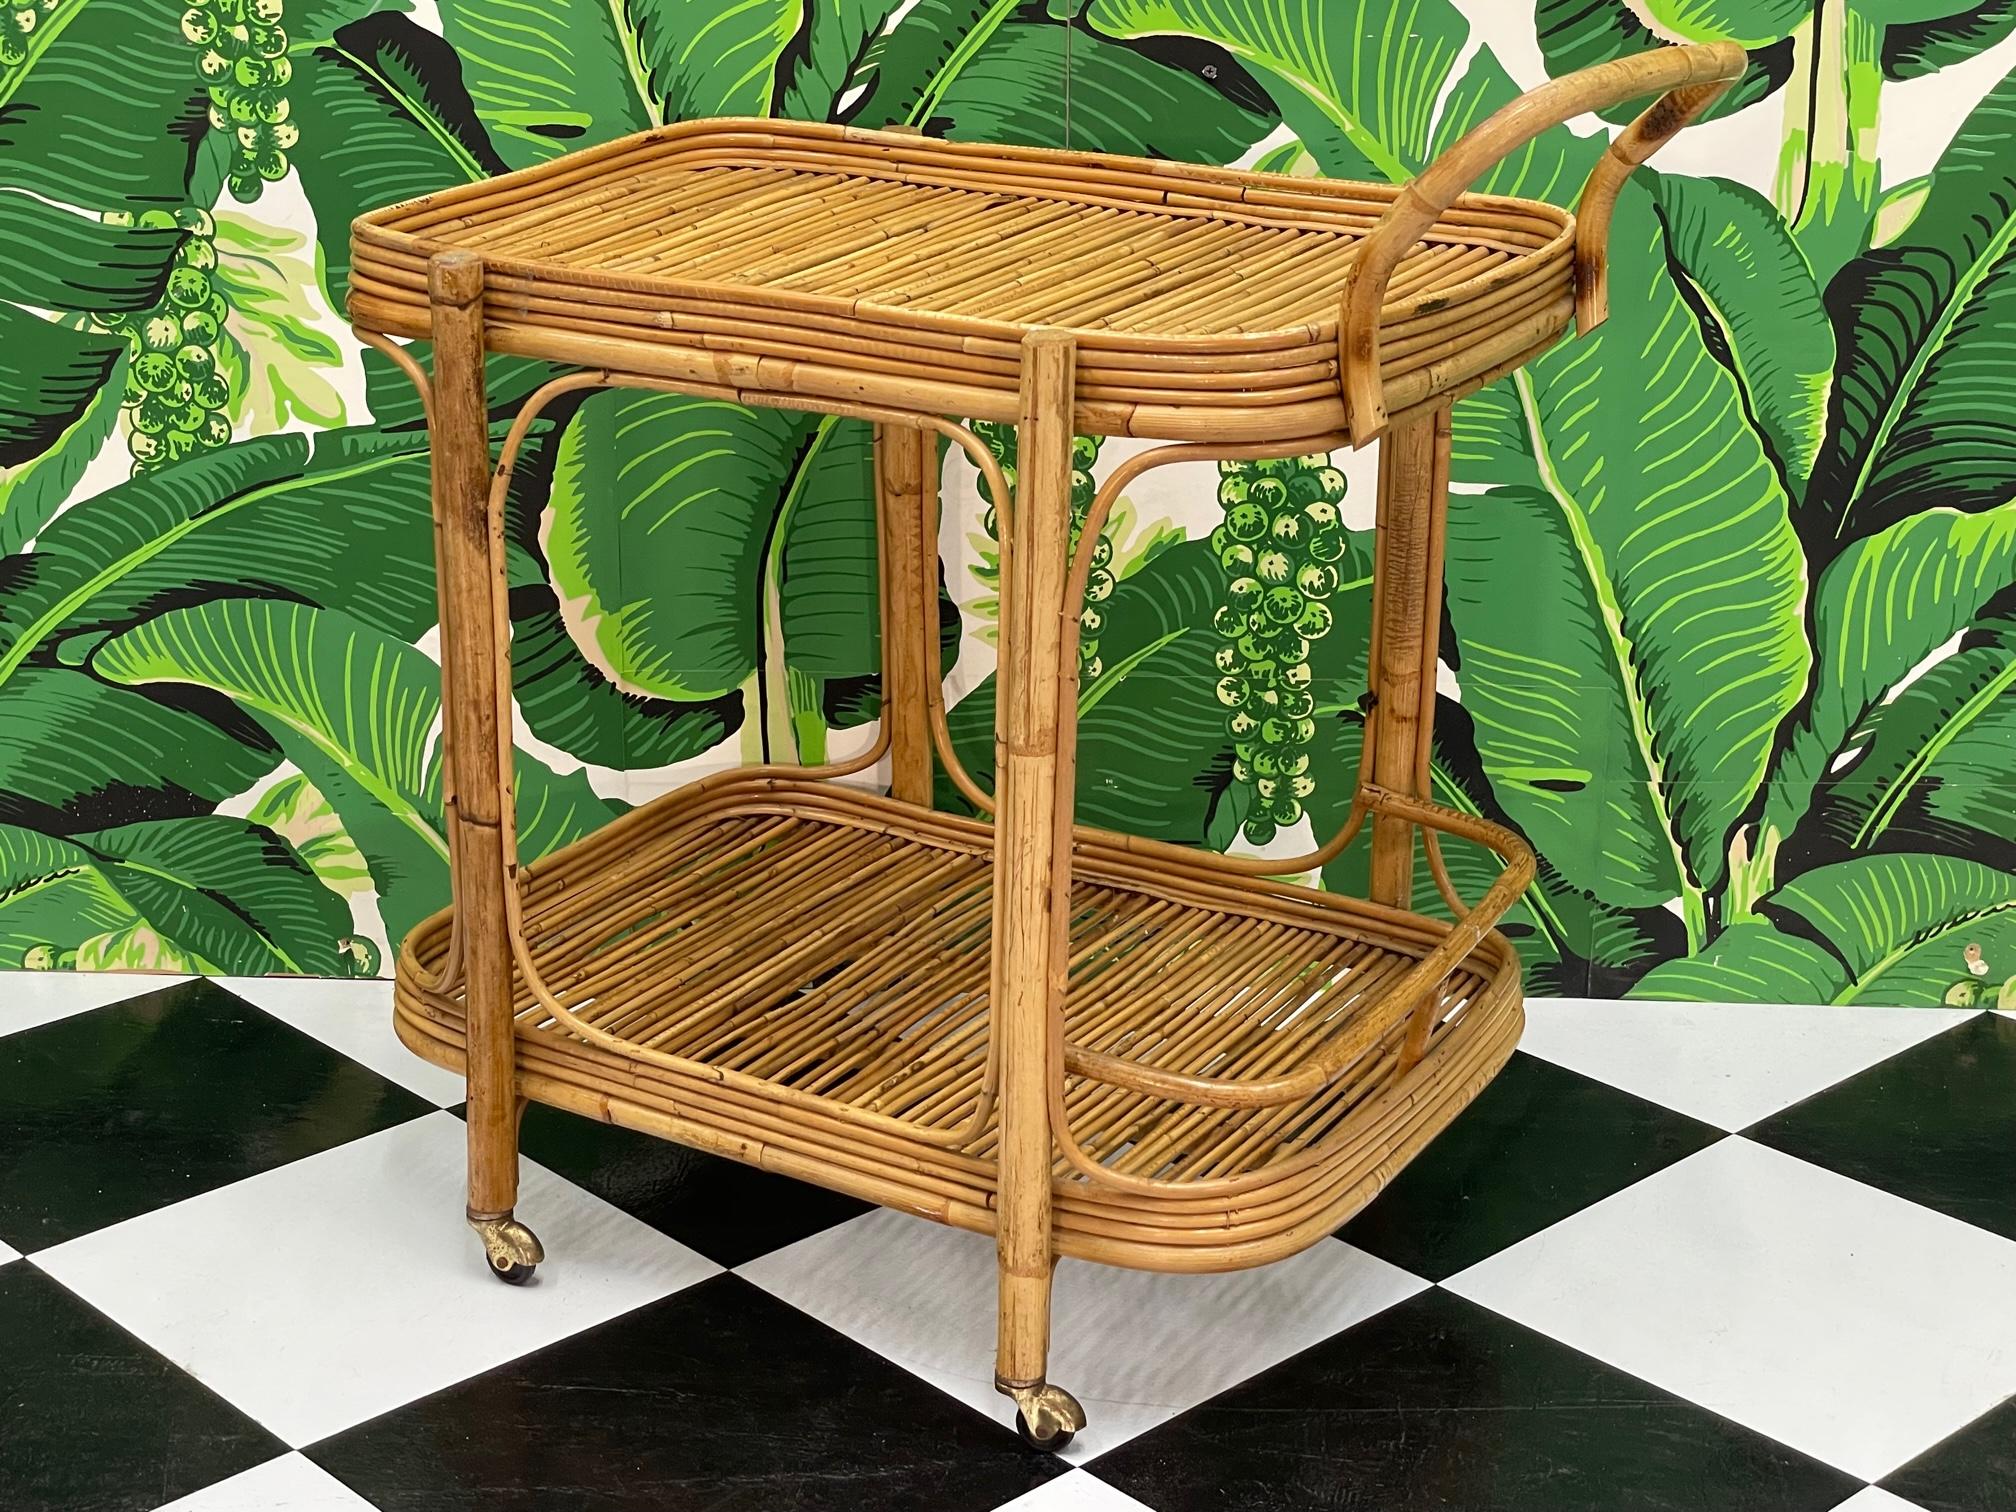 Rattan bar cart features pencil reed platforms and brass castors. Good condition with minor imperfections consistent with age, see photos for condition details.
For a shipping quote to your exact zip code, please message us.
